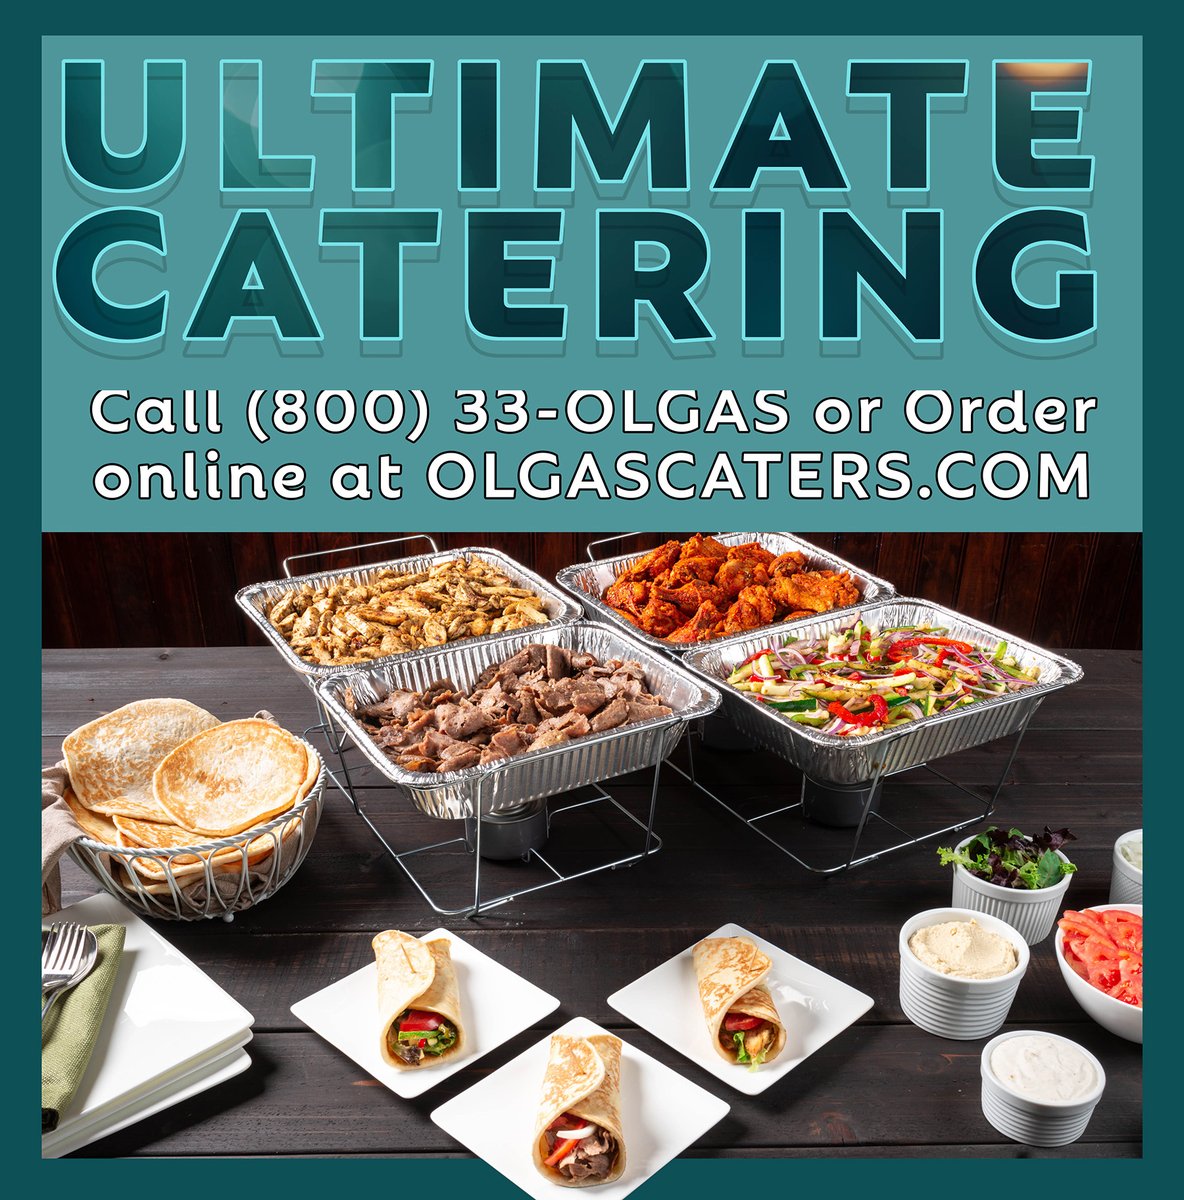 🏀 Get your game on with our Ultimate Platter 🏀 Order for next day pick-up or delivery at olgascaters.com or call 1-800-33-OLGAS. Game time, Madness time! #OlgaKitchen #GameTime #PartyTime #MarchMadness